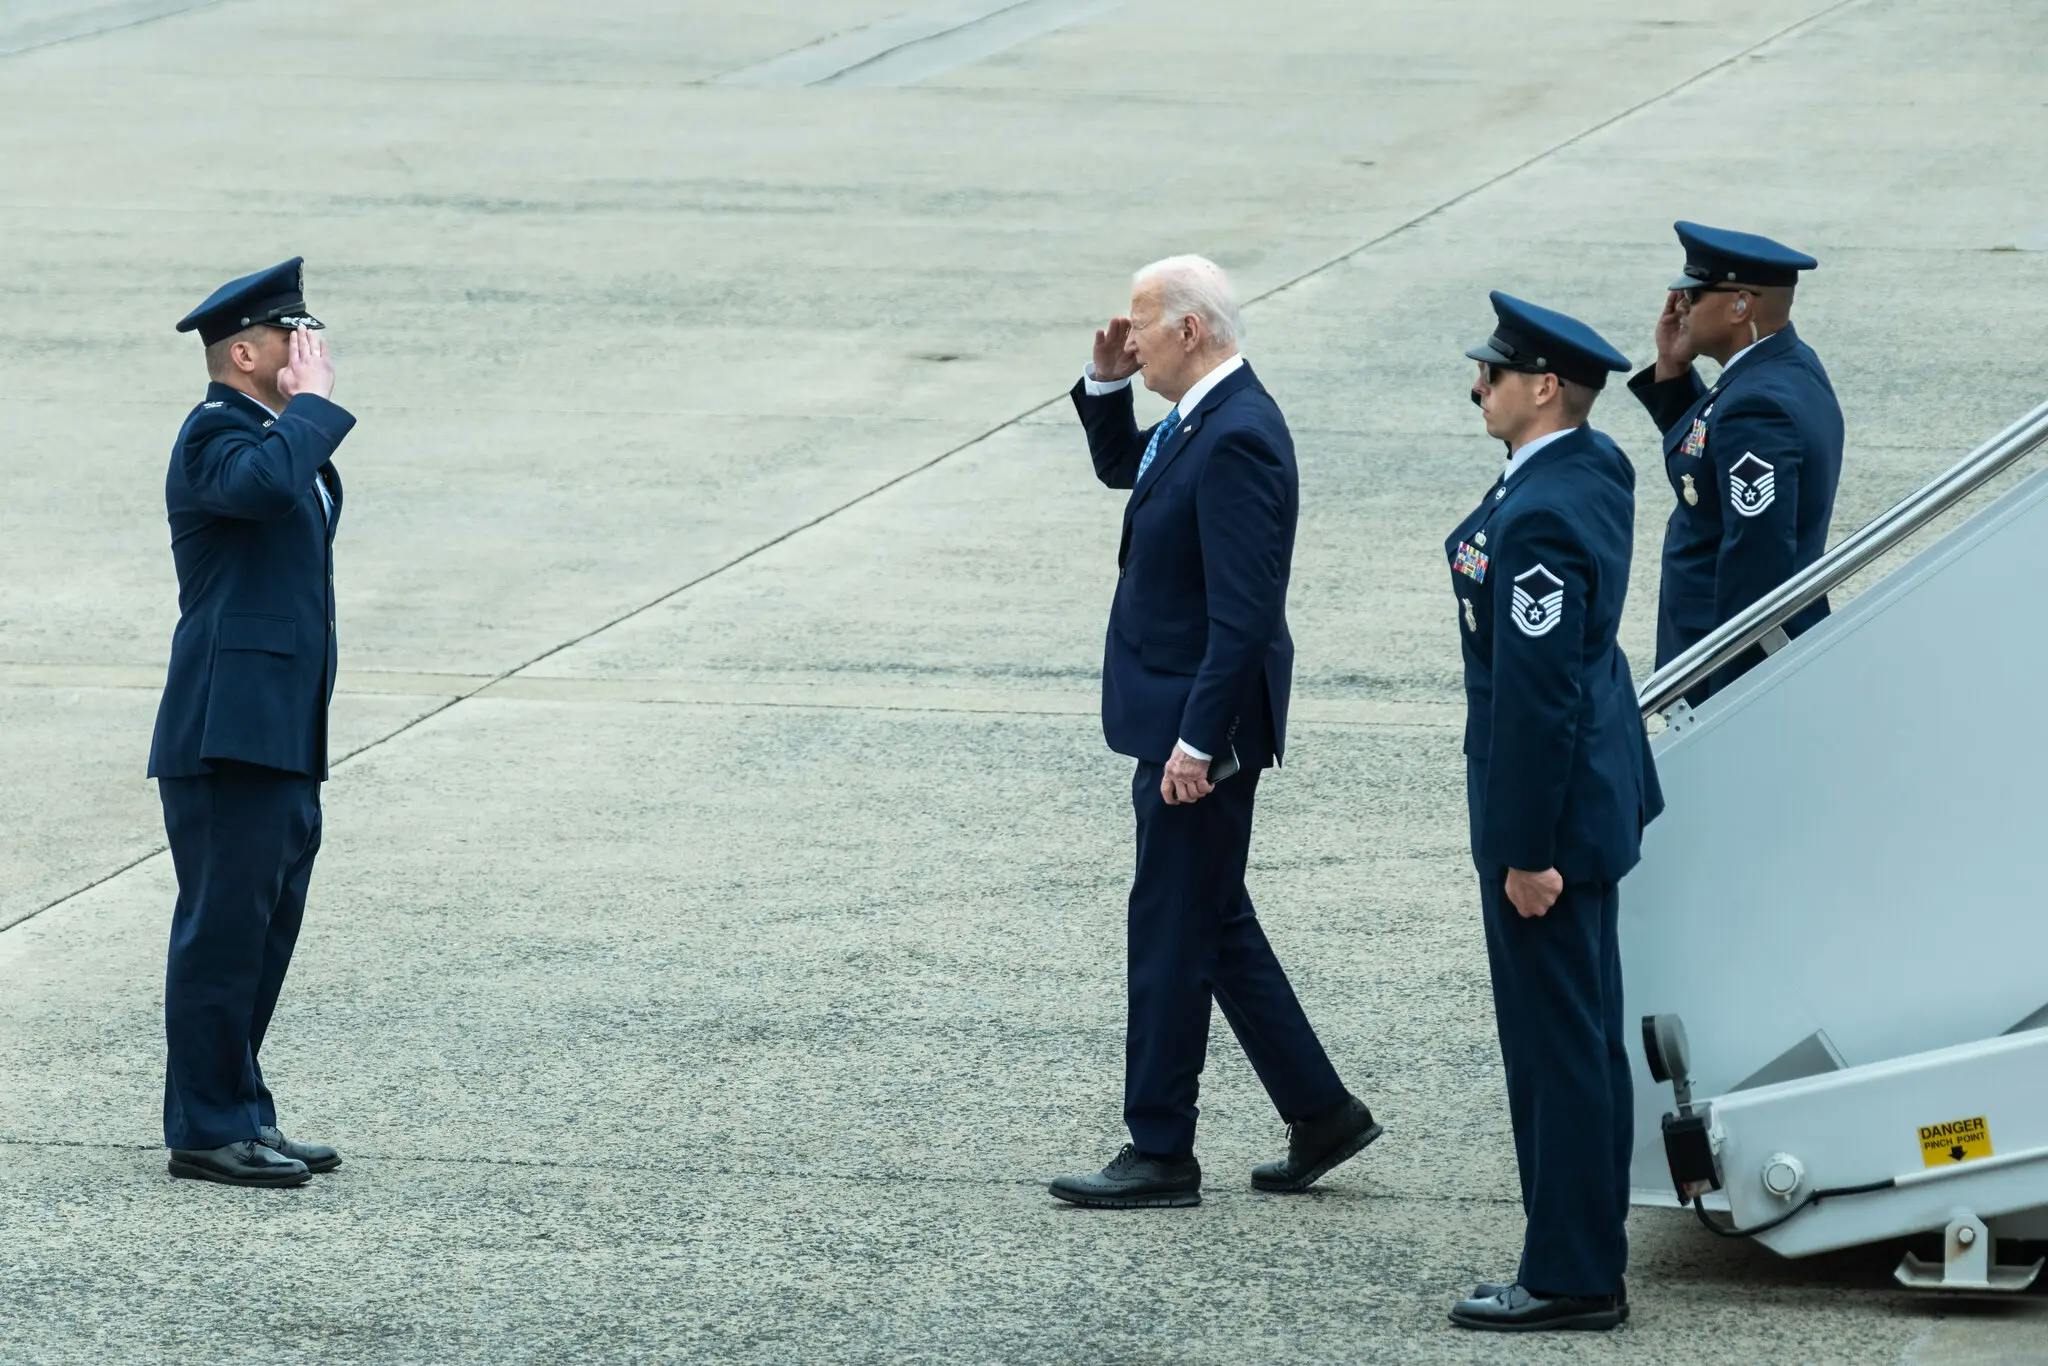 Biden saluting after exiting the plane